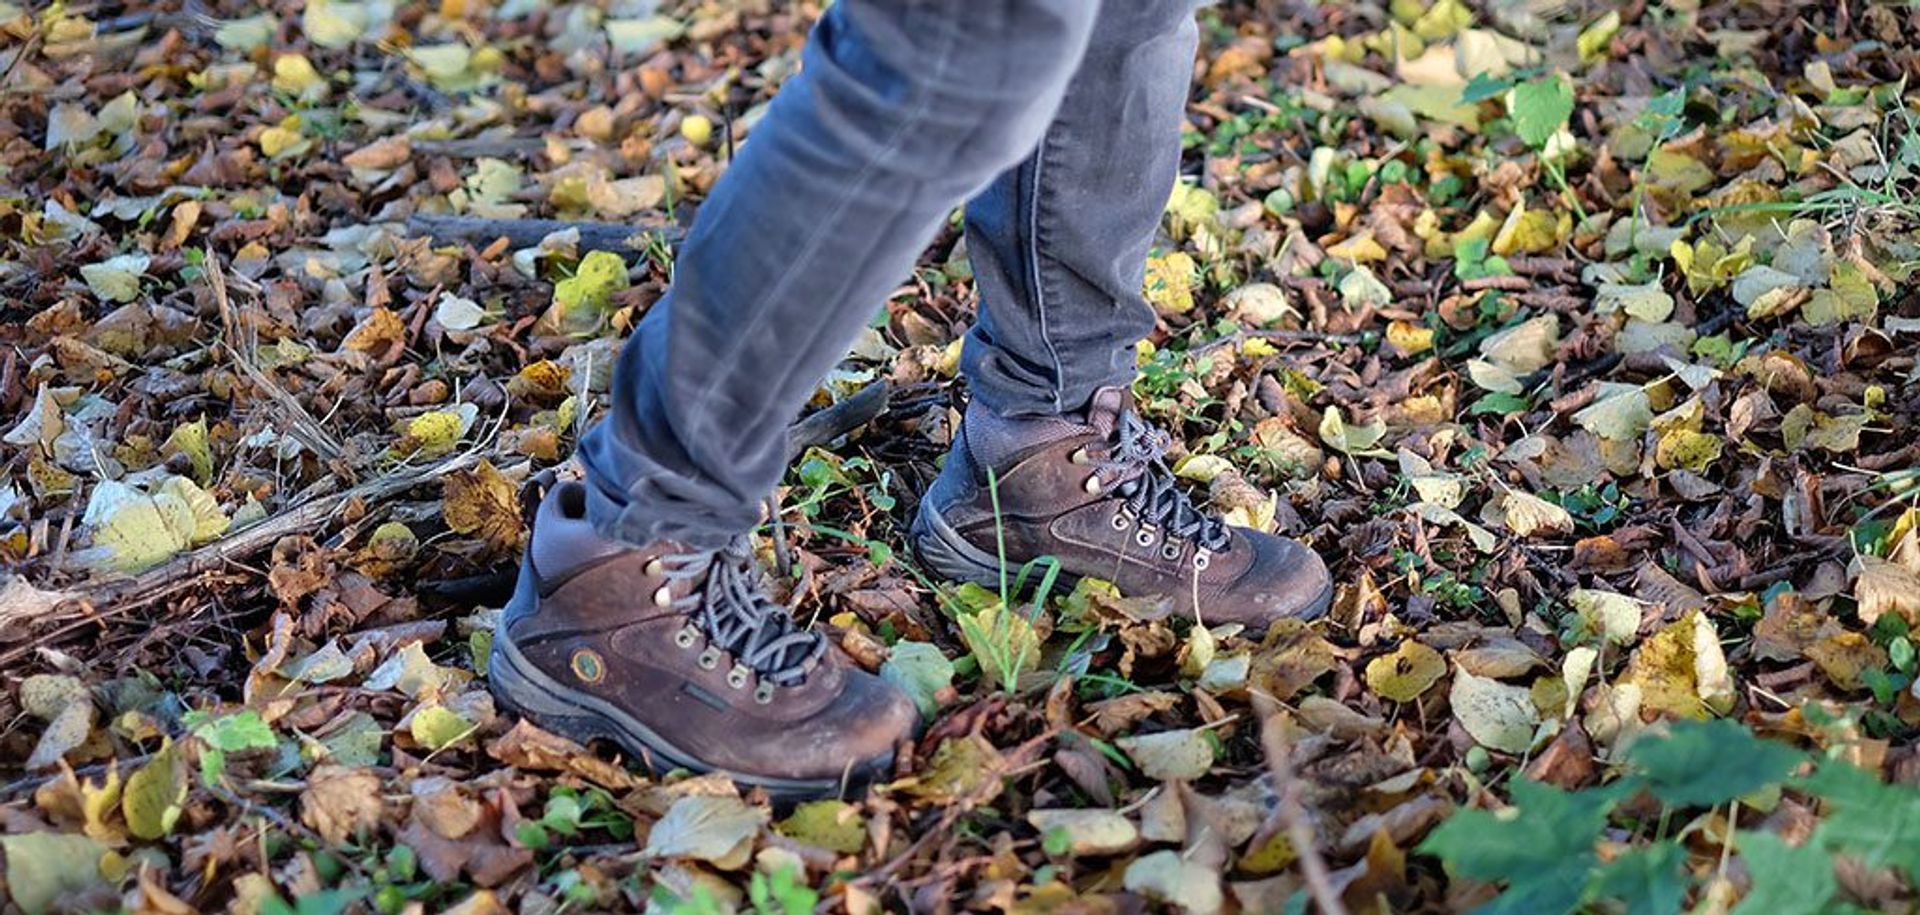 This boots are made for hiking